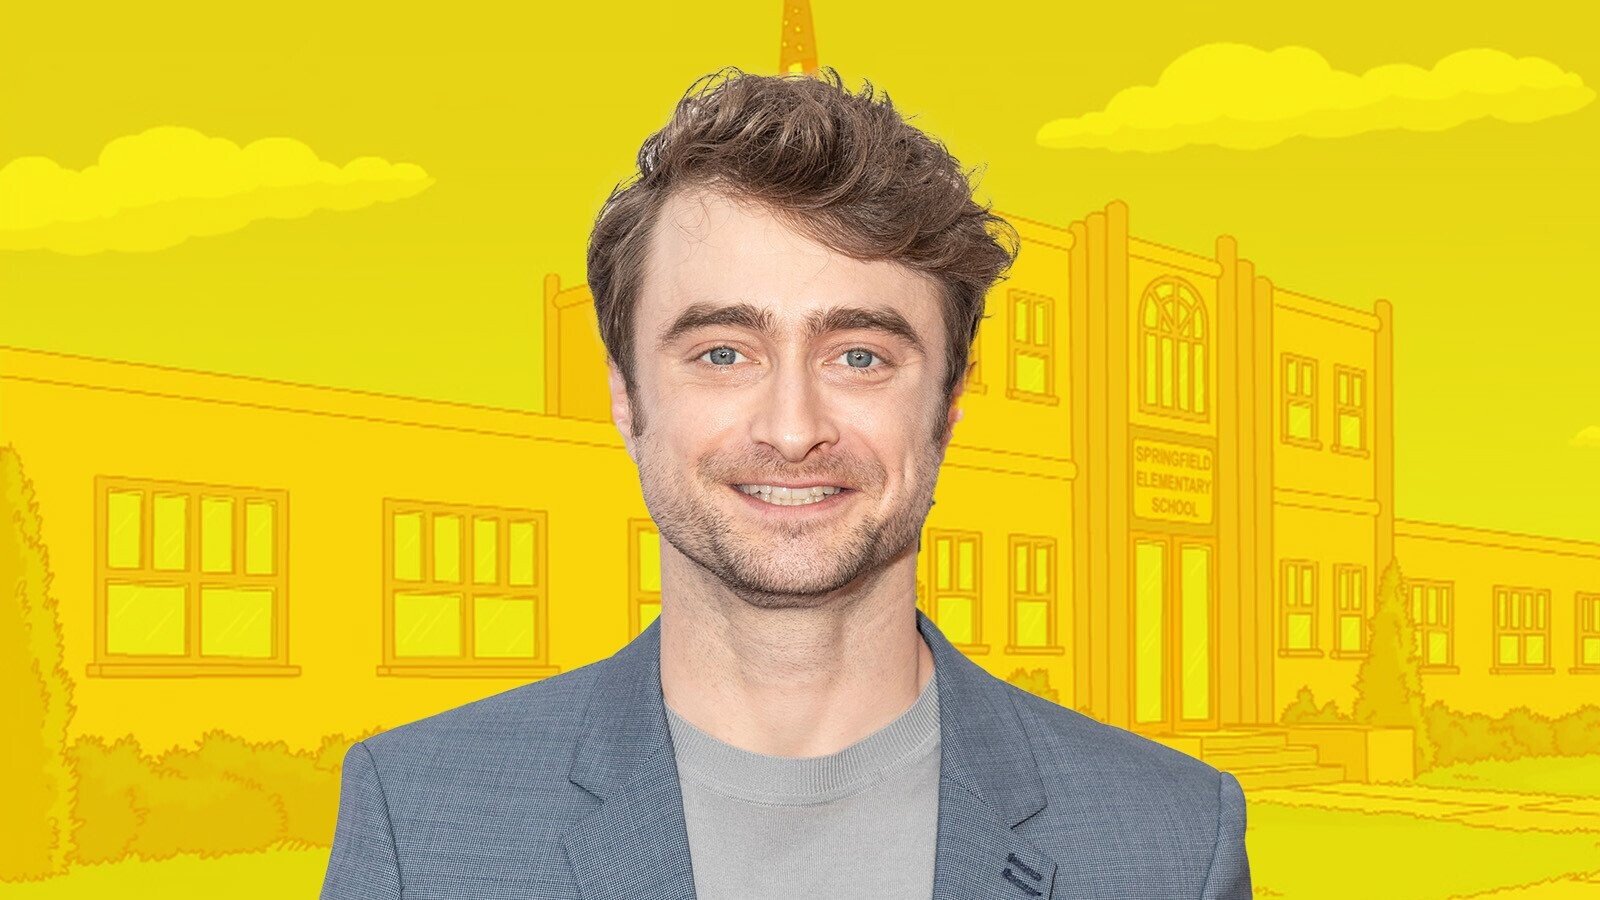 Daniel Radcliffe’s Education Is Mainly Based on ‘The Simpsons’